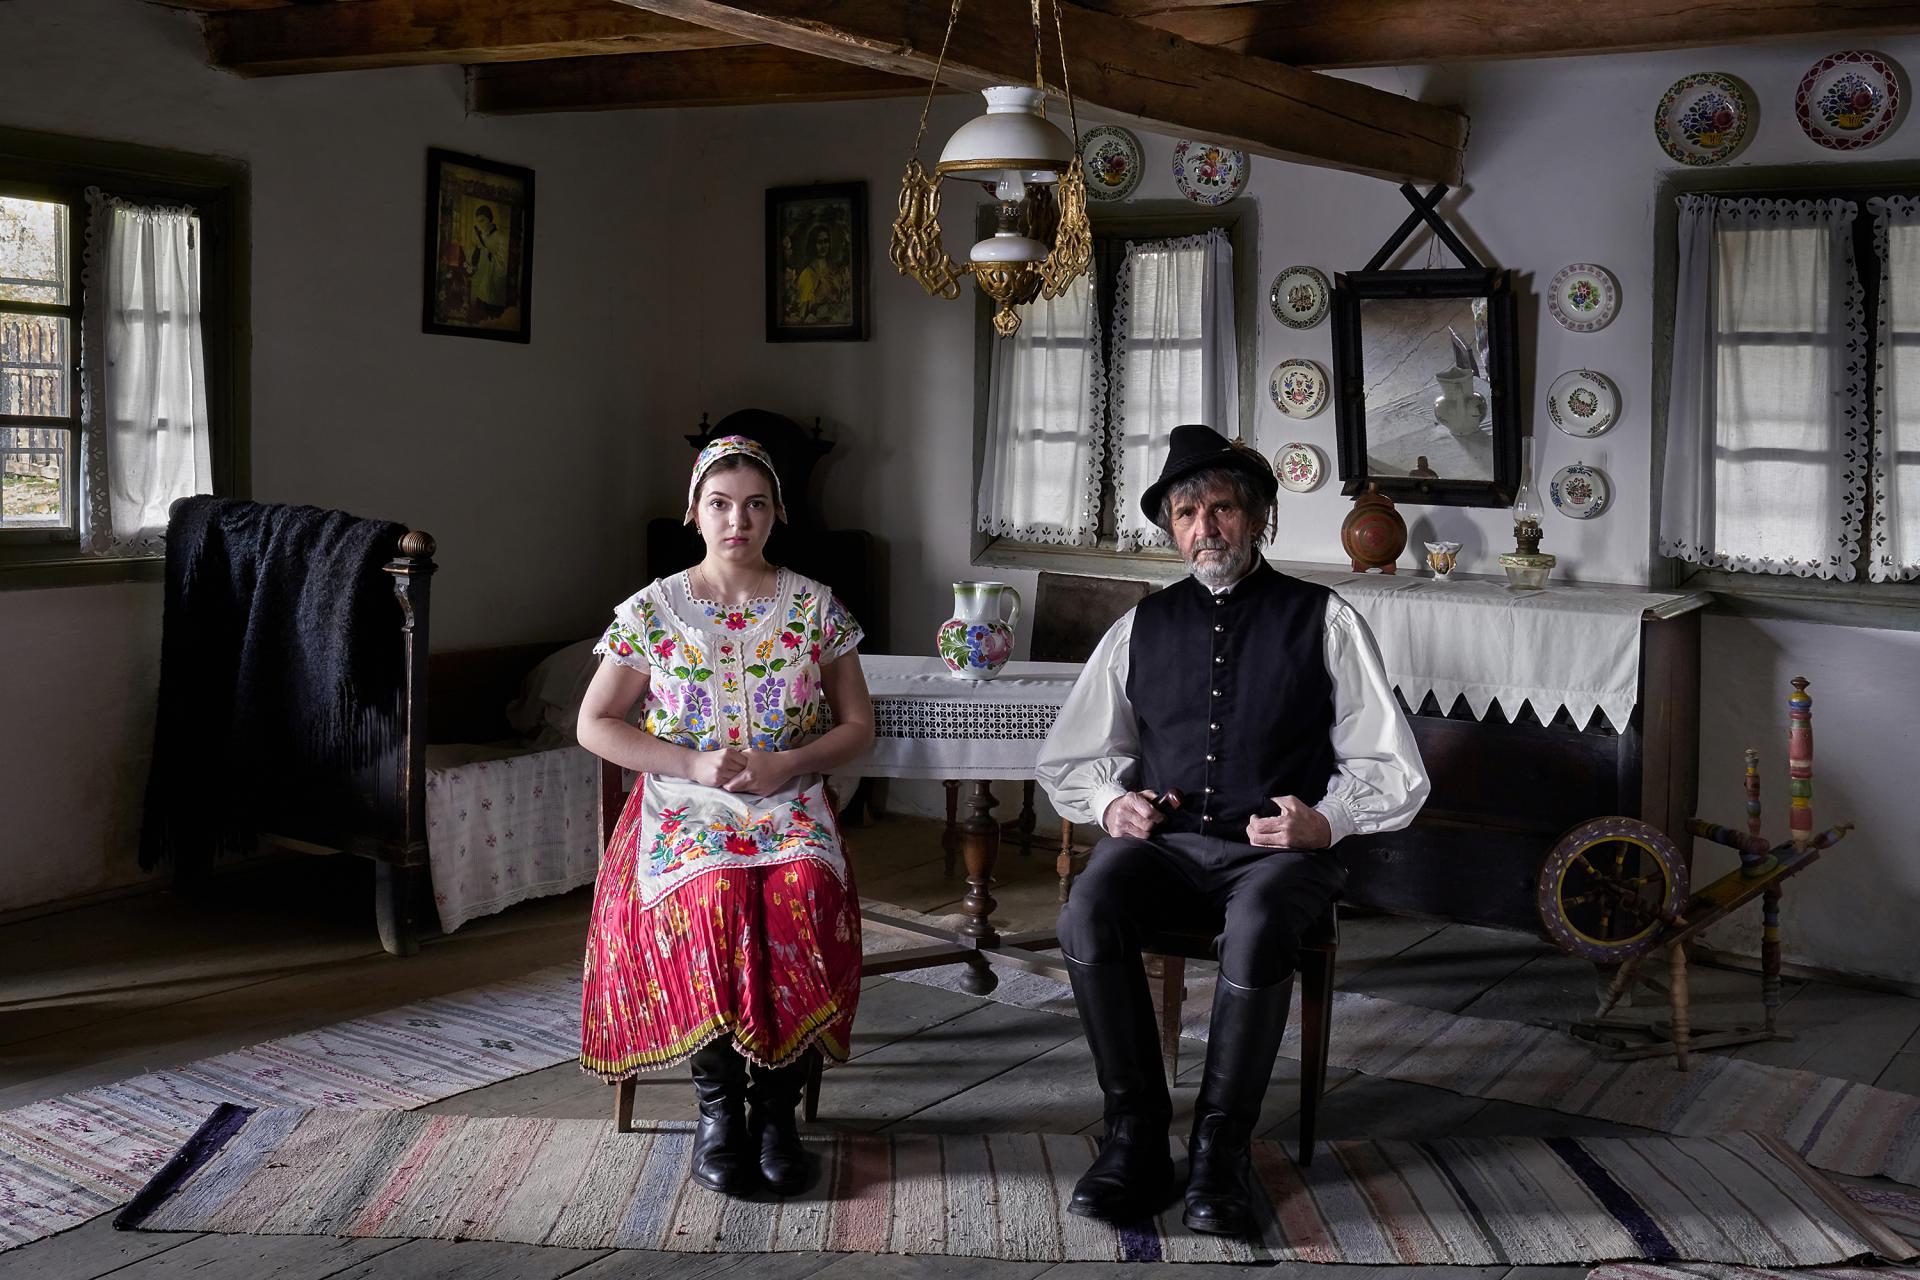 The Ukrainian photographer's project about the culture of Transcarpathia won silver at the New York Photography Awards